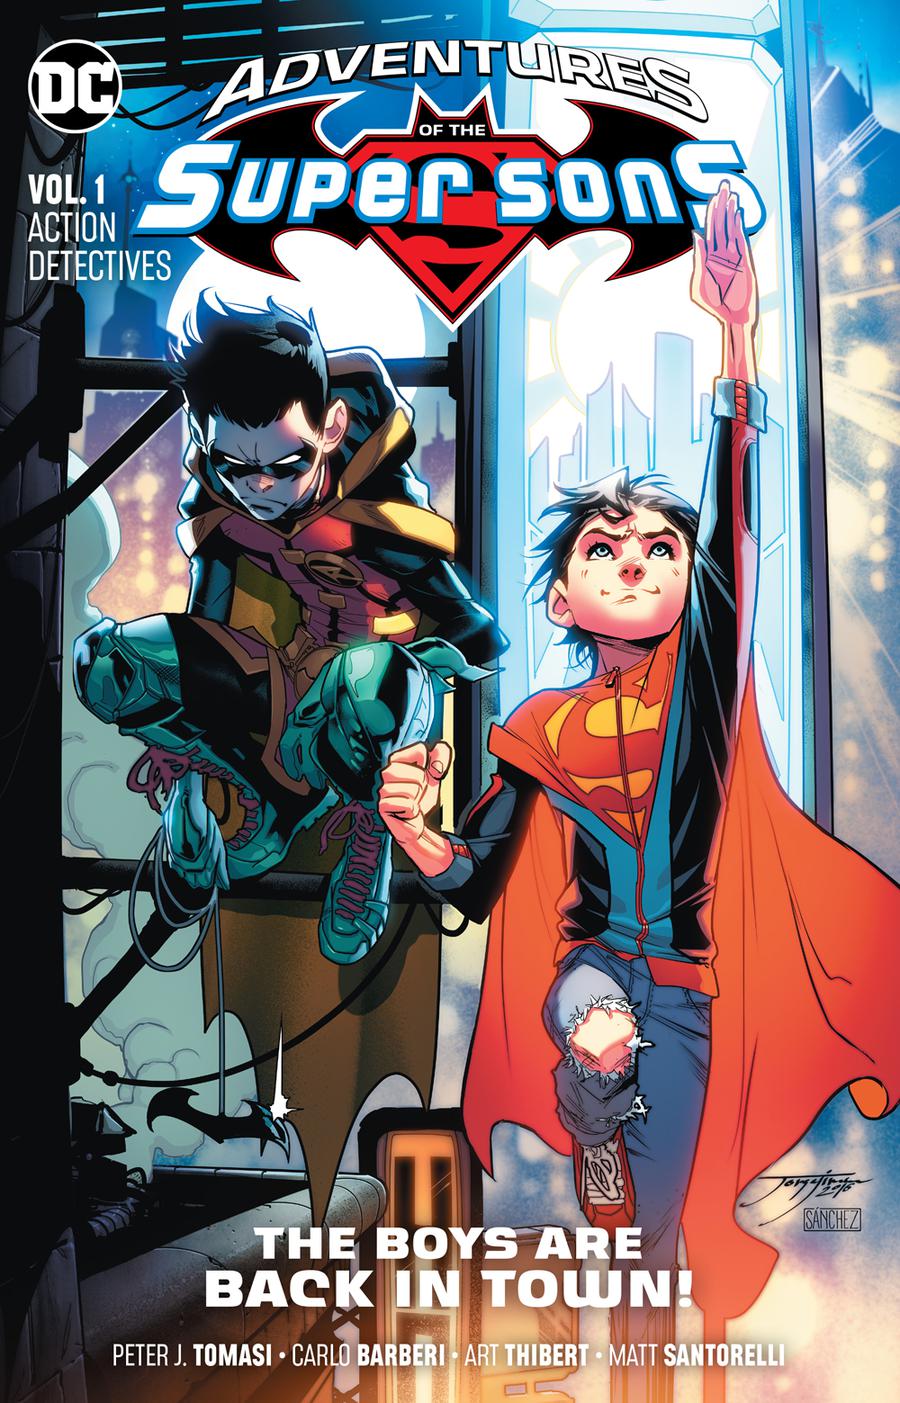 Adventures Of The Super Sons Vol 1 Action Detective TP